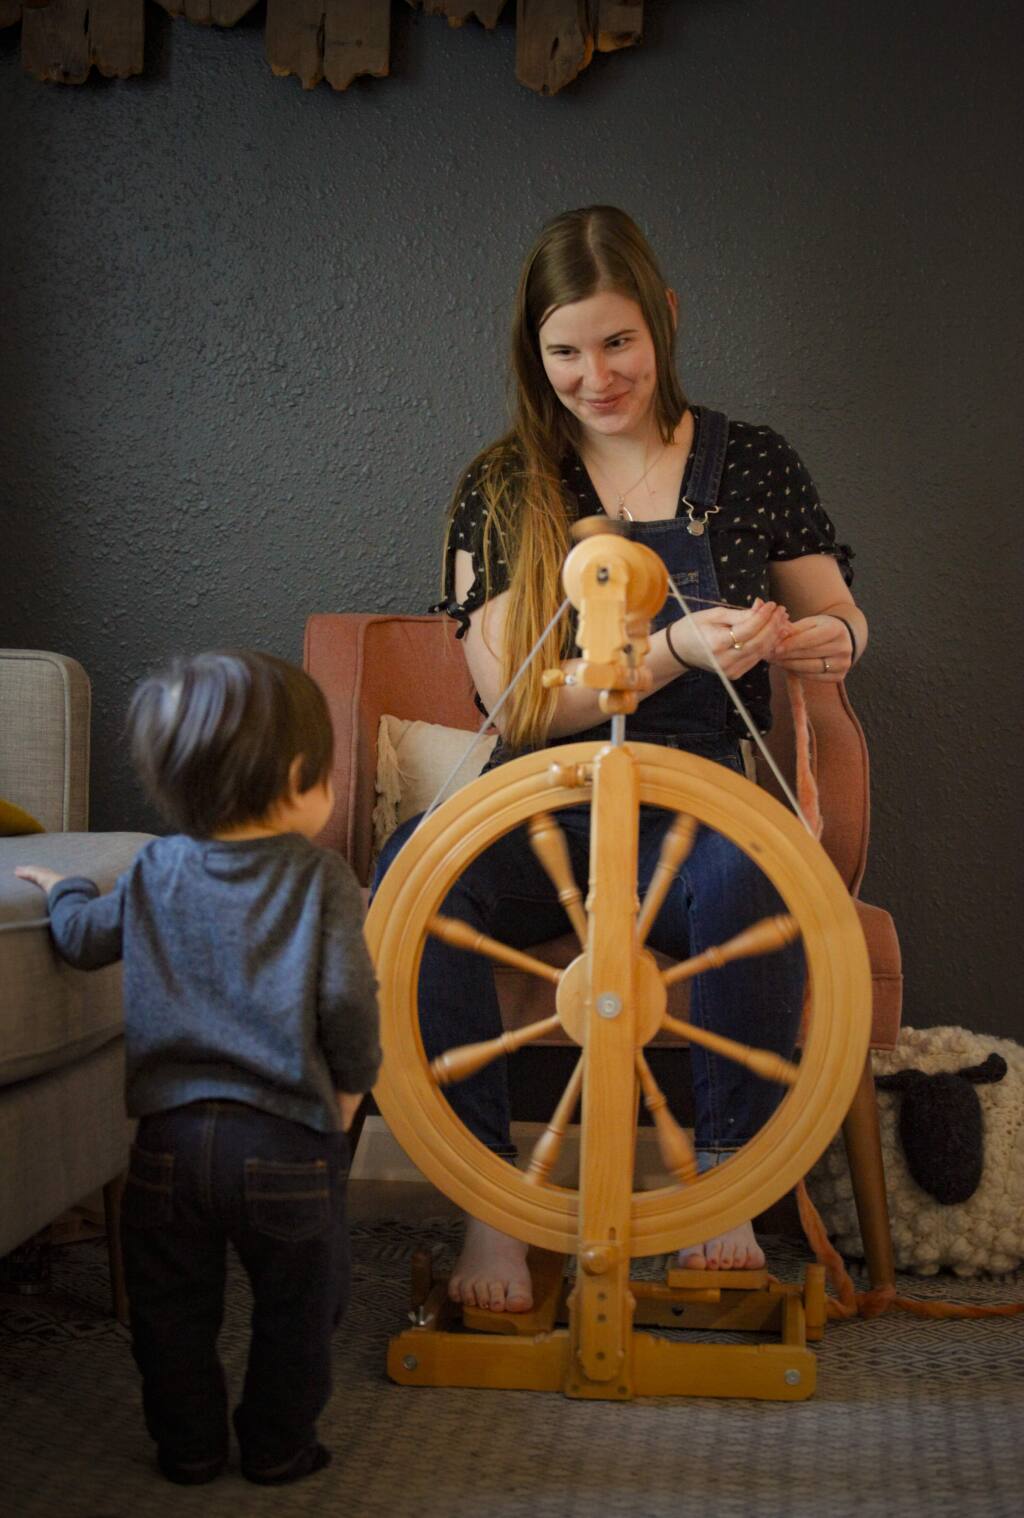 Petaluma, CA, USA. Tuesday, February 25, 2020._ Knitter Alisha Reyes opened Fiber Circle Studios in Cotati a few years ago. She teaches classes and creates indie dyed yarn in her studio where she is accompanied by her 11-month-old son, Dominic. (CRISSY PASCUAL/ARGUS-COURIER STAFF)